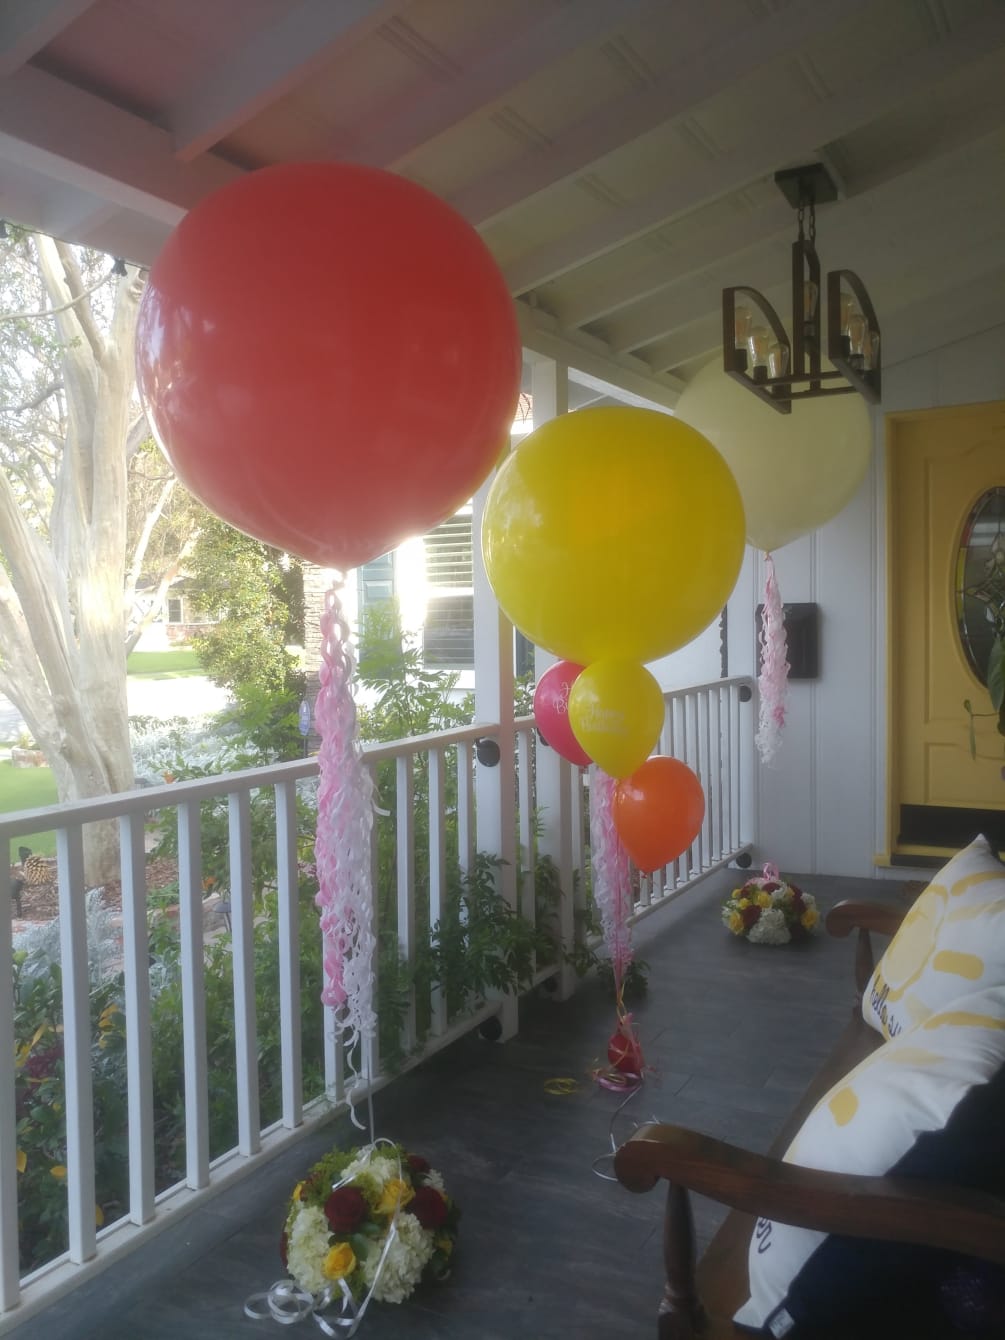 3 FT (36-inch) balloons are the perfect addition to any balloon bouquet